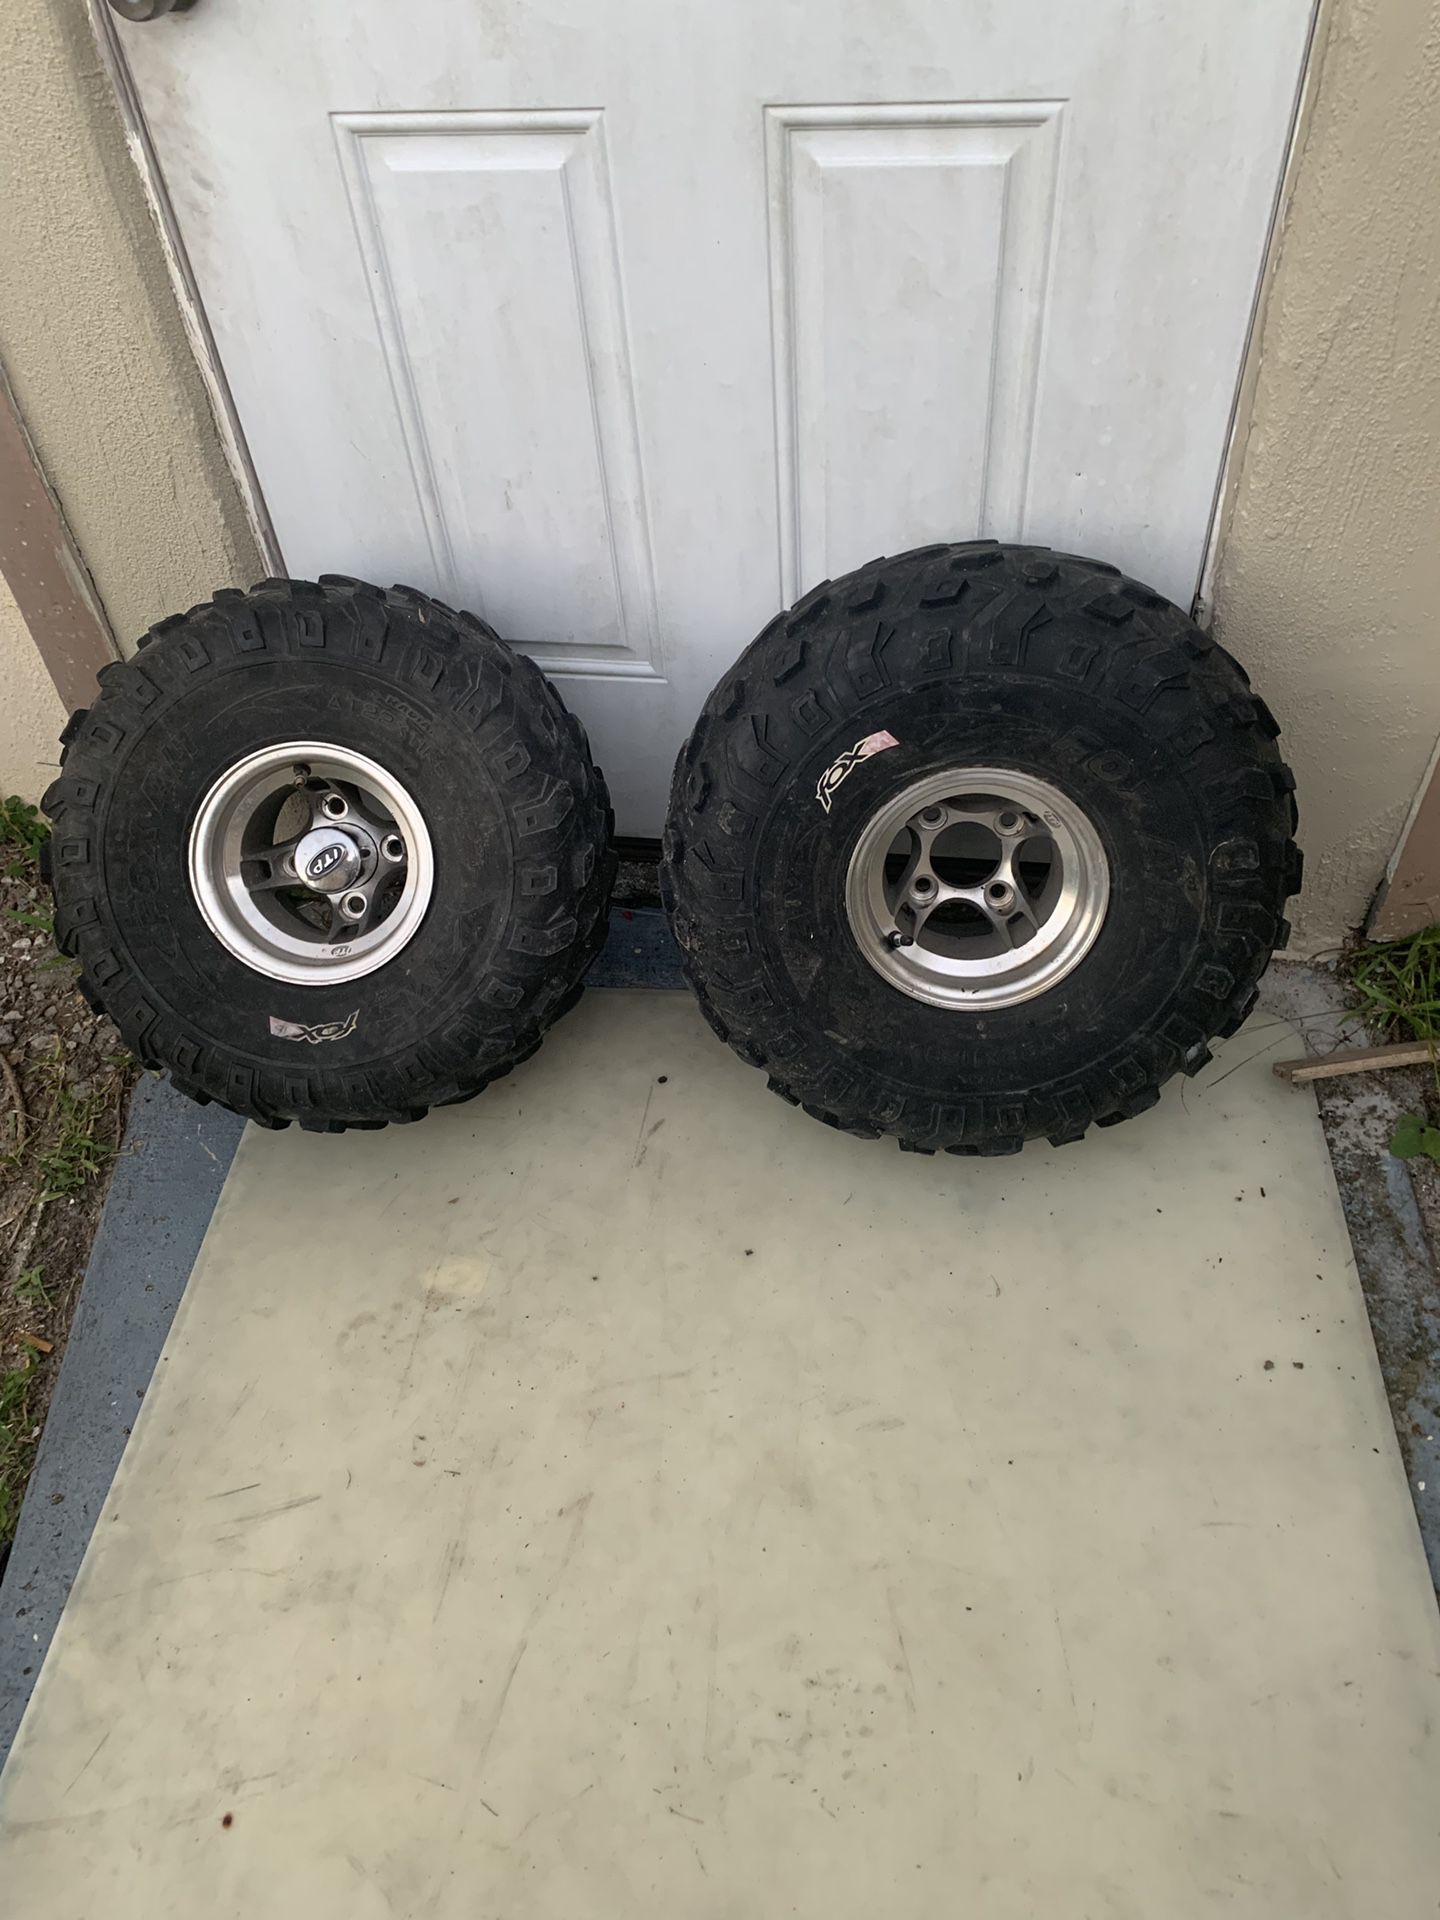 2 atv tires and rims in great condition 40 both